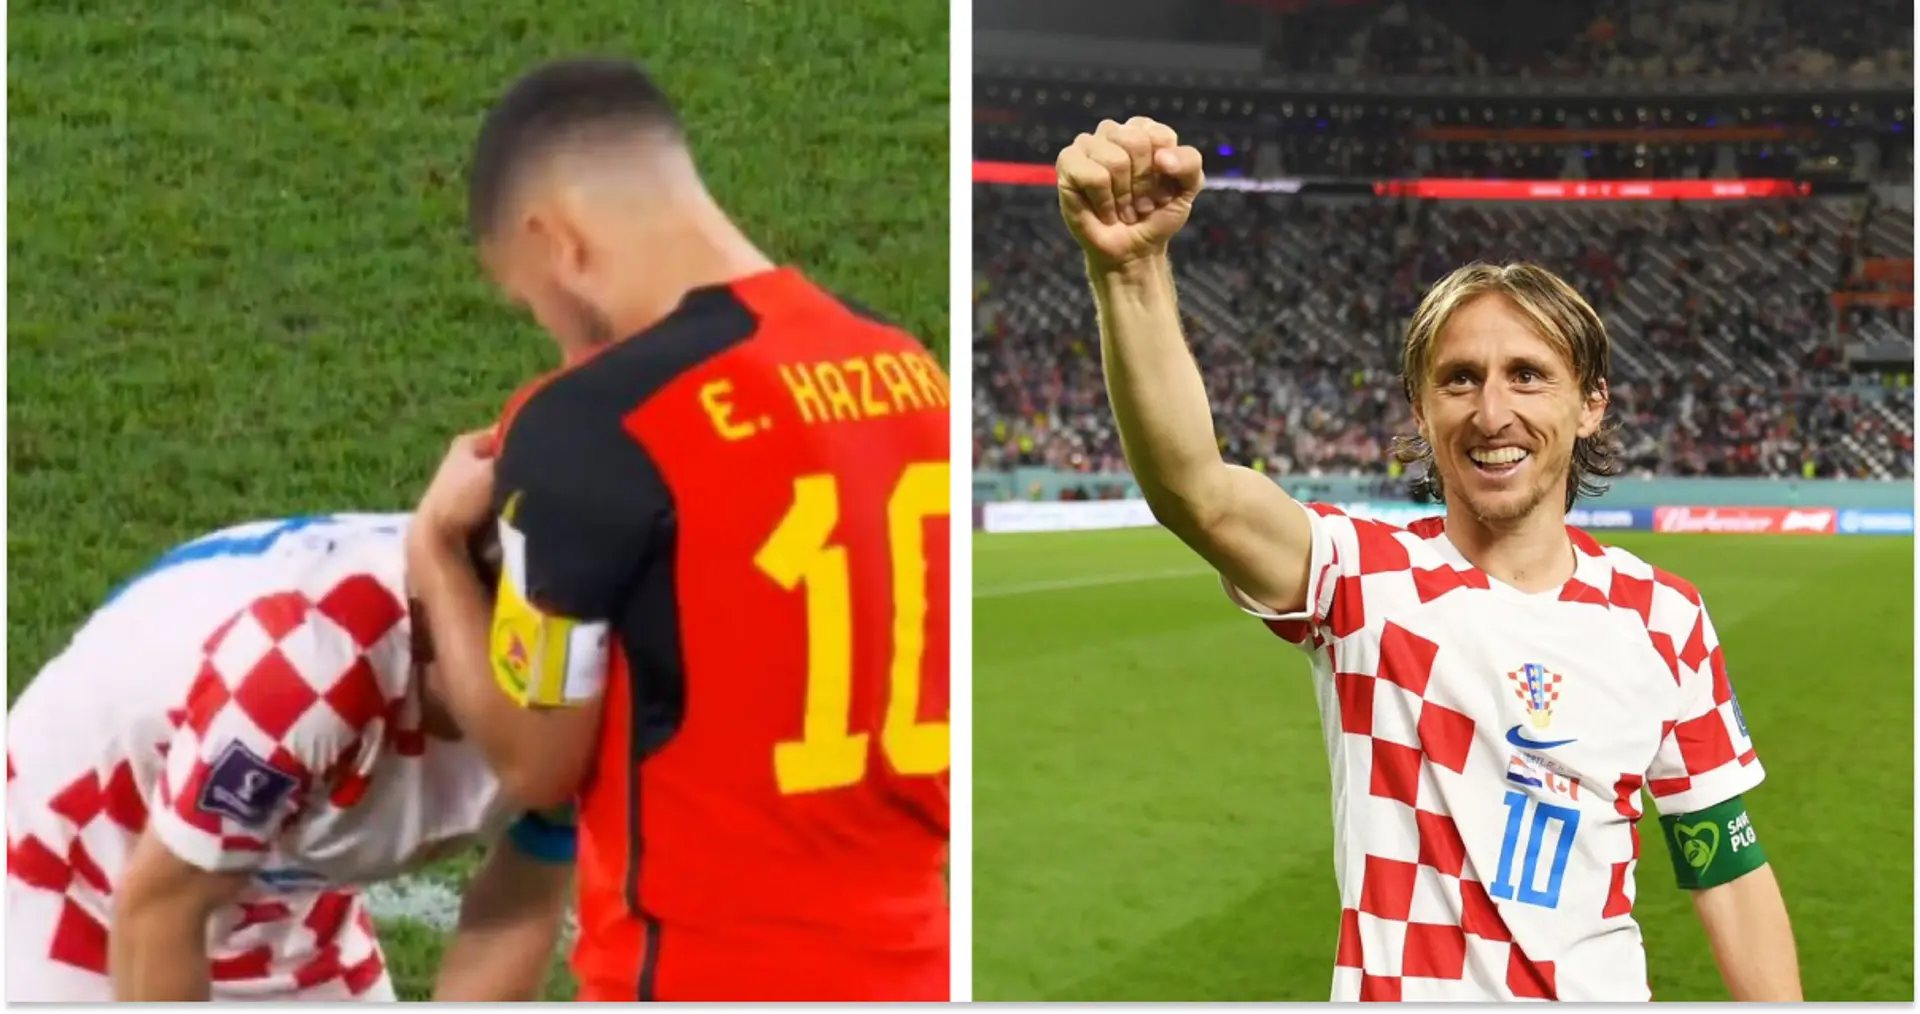 Modric through to World Cup knockouts, Belgium eliminated